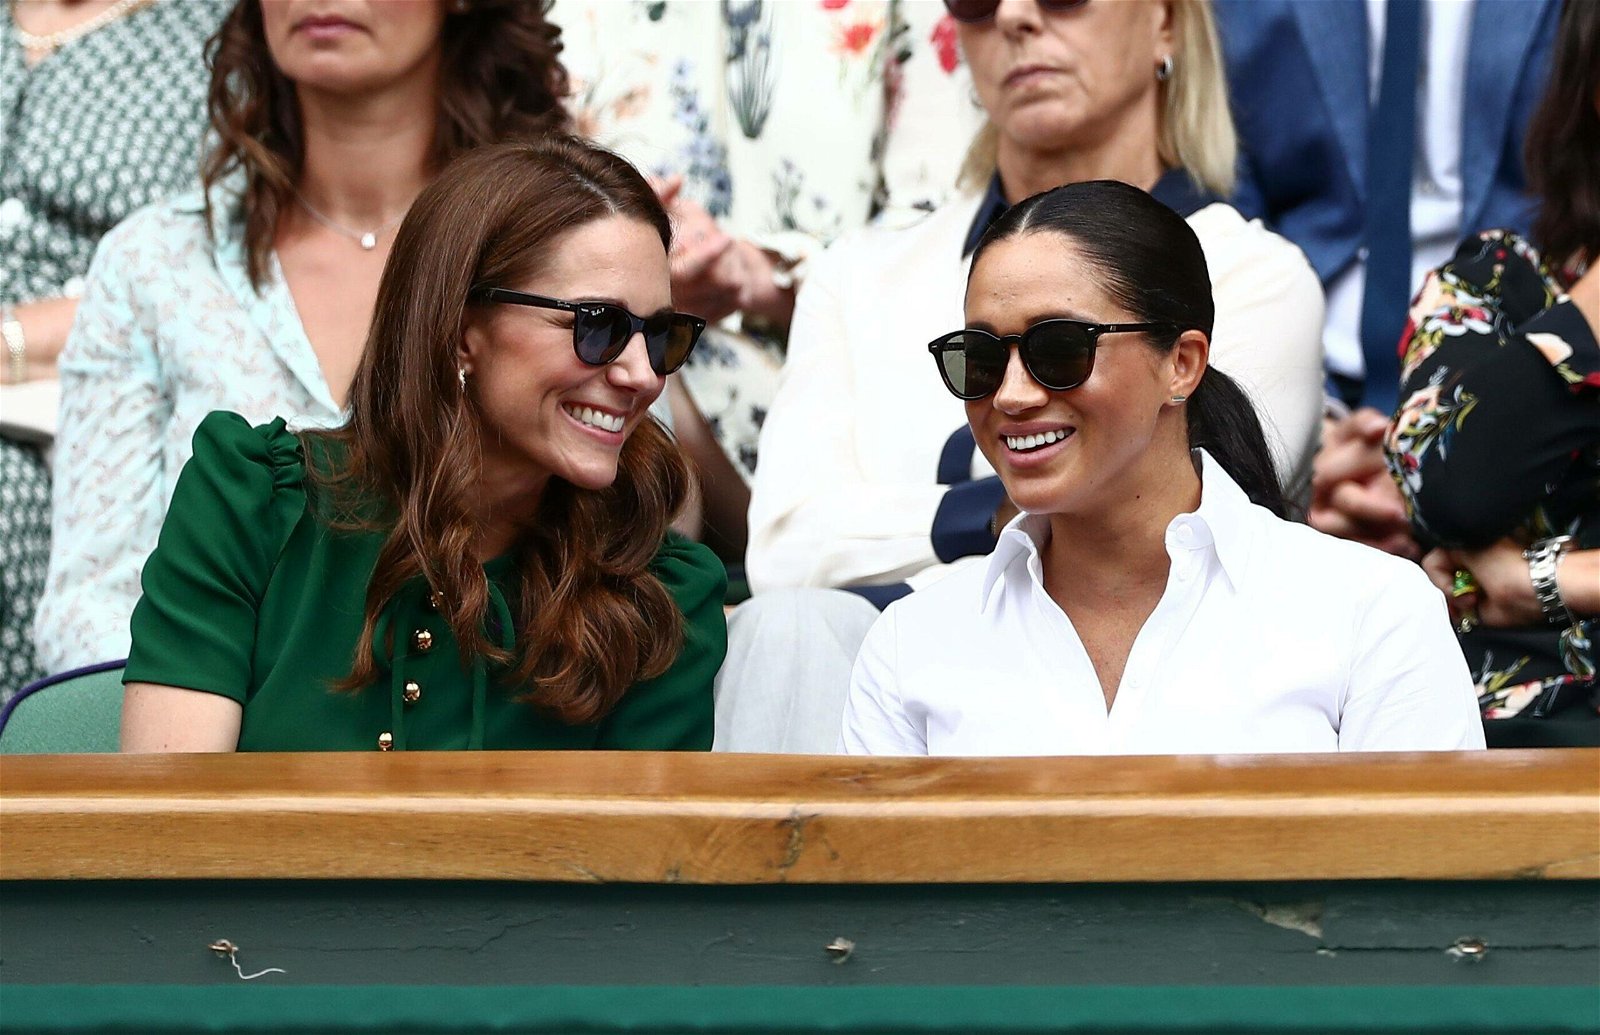 Fans Divided as Kate Middleton and Meghan Markle “…pitted against each other” Over Body Language Row